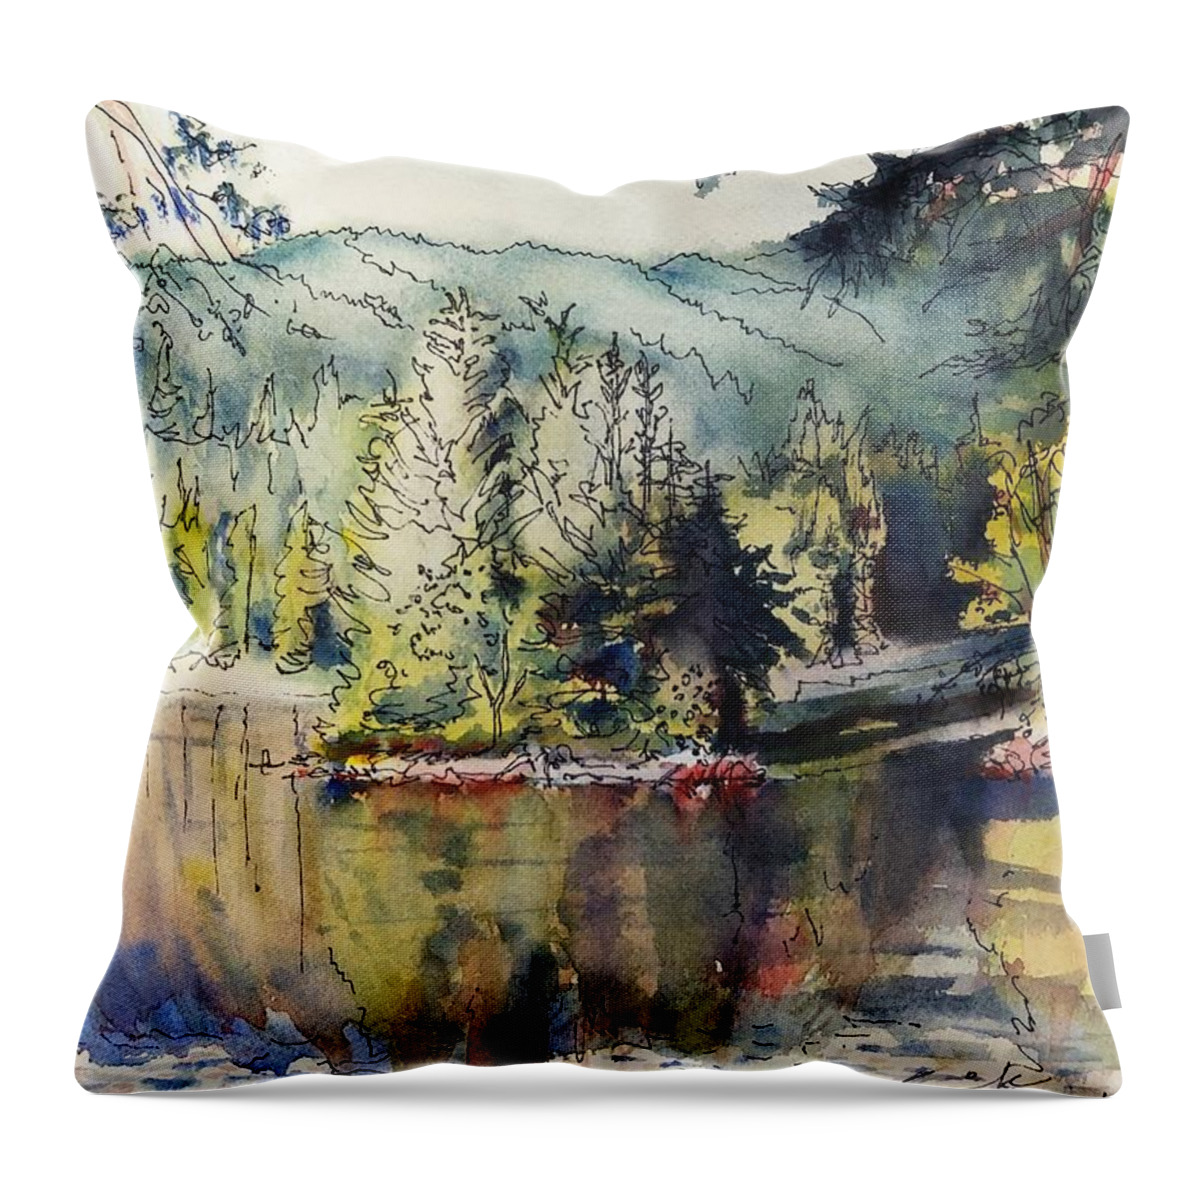 Reflections Throw Pillow featuring the painting Alice Lake by Sonia Mocnik